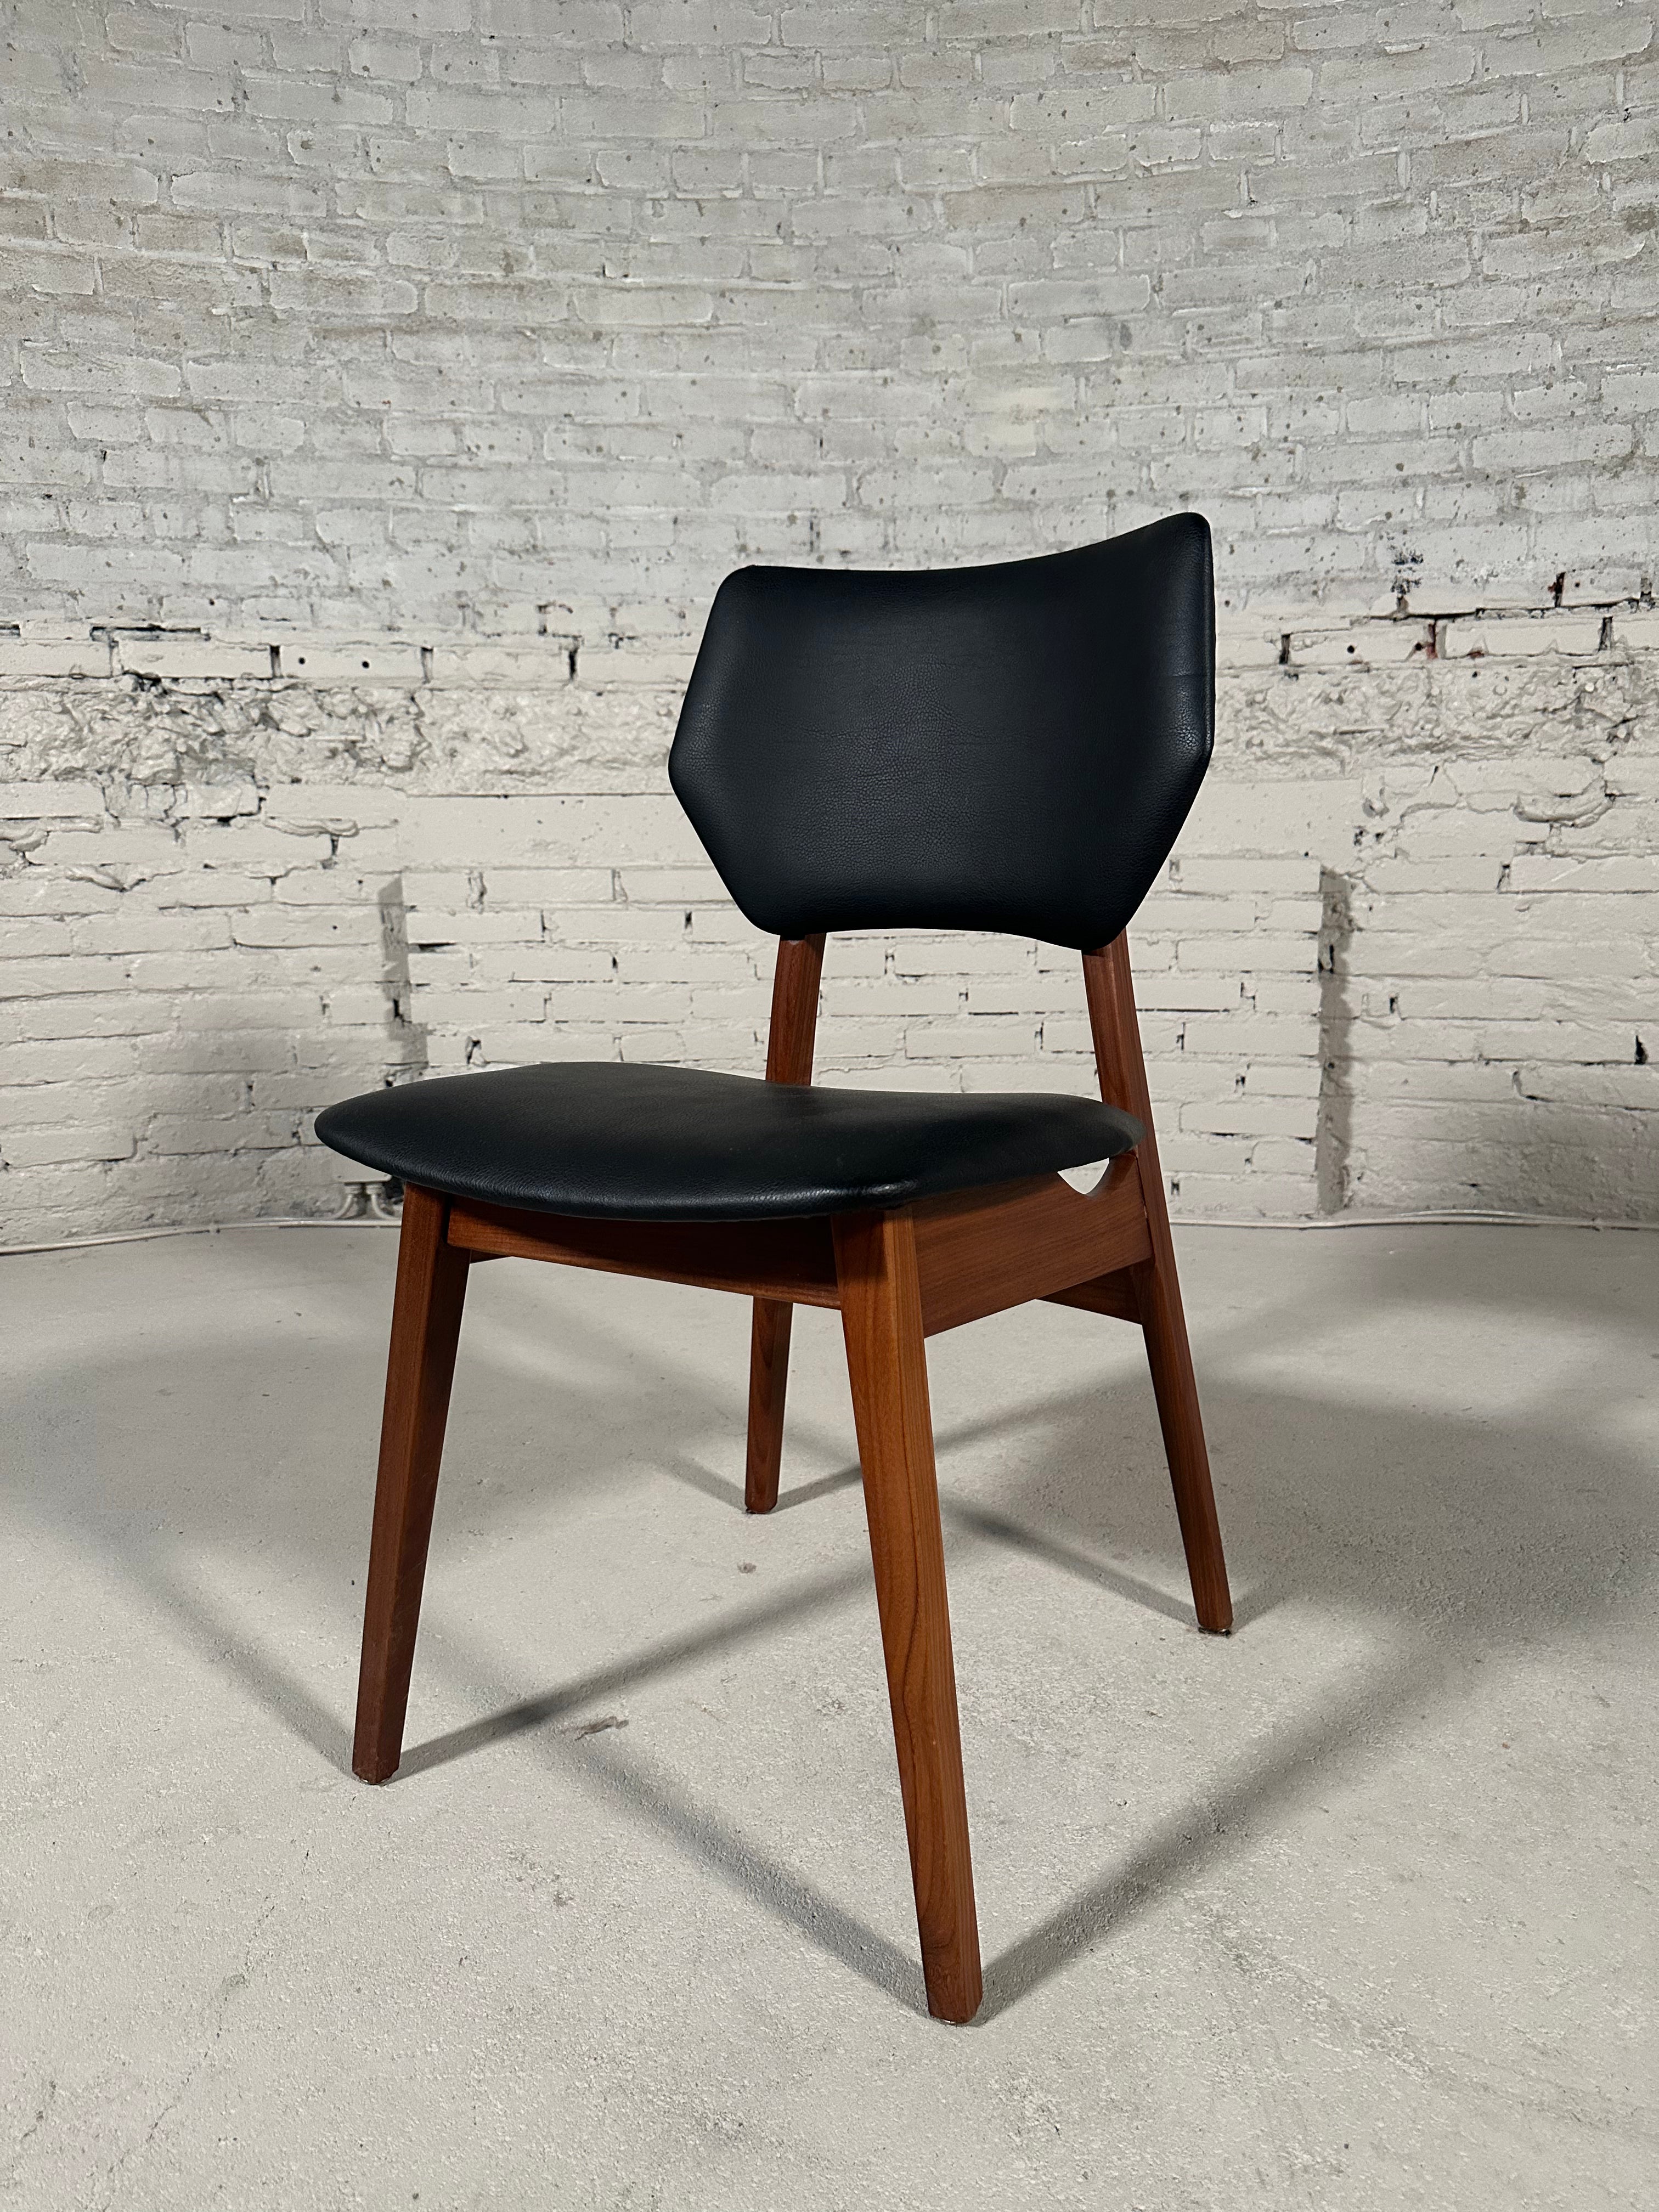 Danish Design Chair from the 1960's